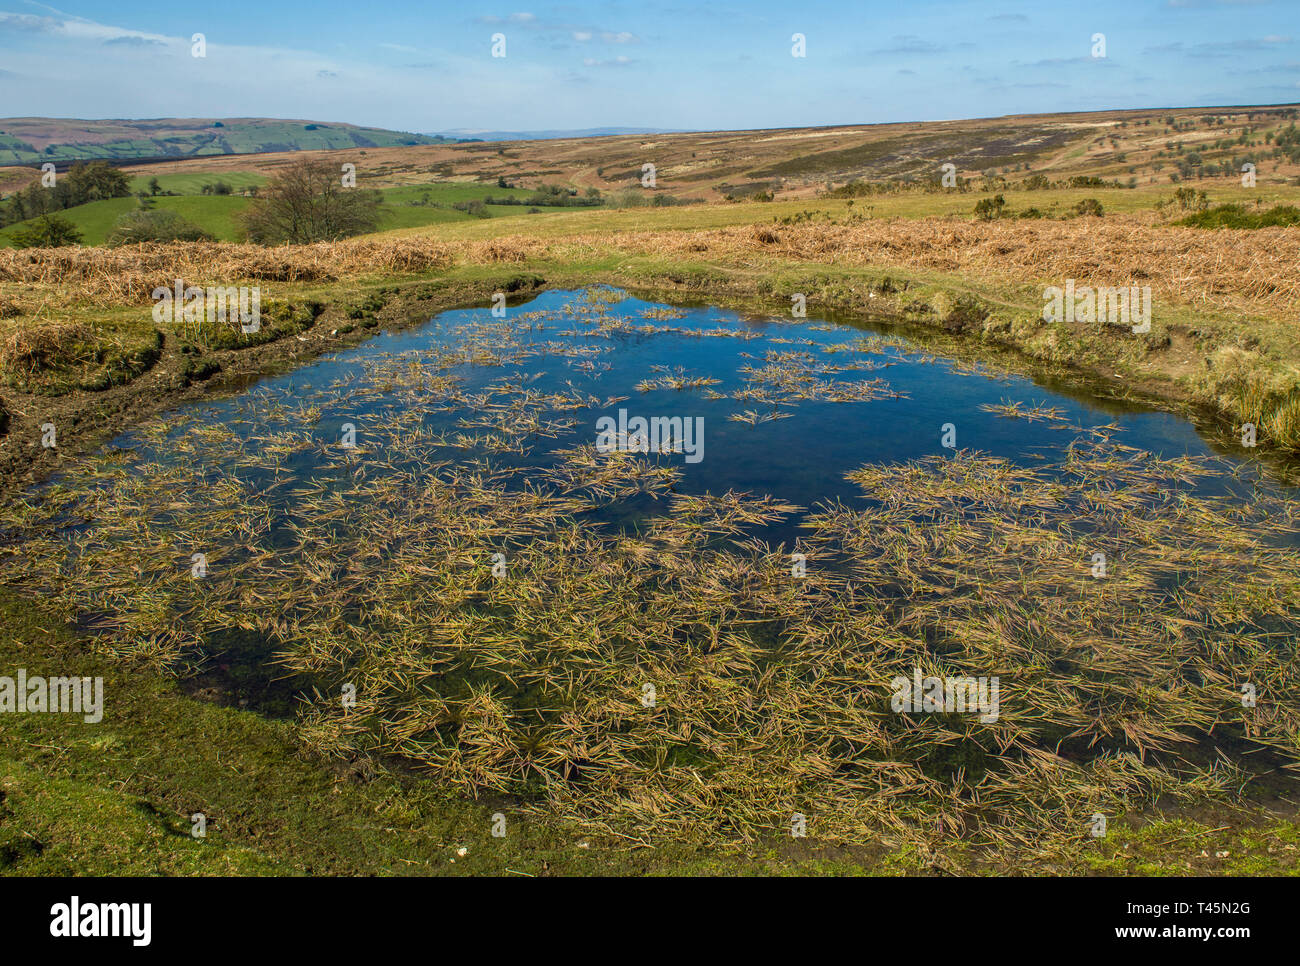 The hills of Radnorshire above the Wye Valley in Wales showing a pond or pool with the hills disappearing into the distance on a sunny Spring day Stock Photo